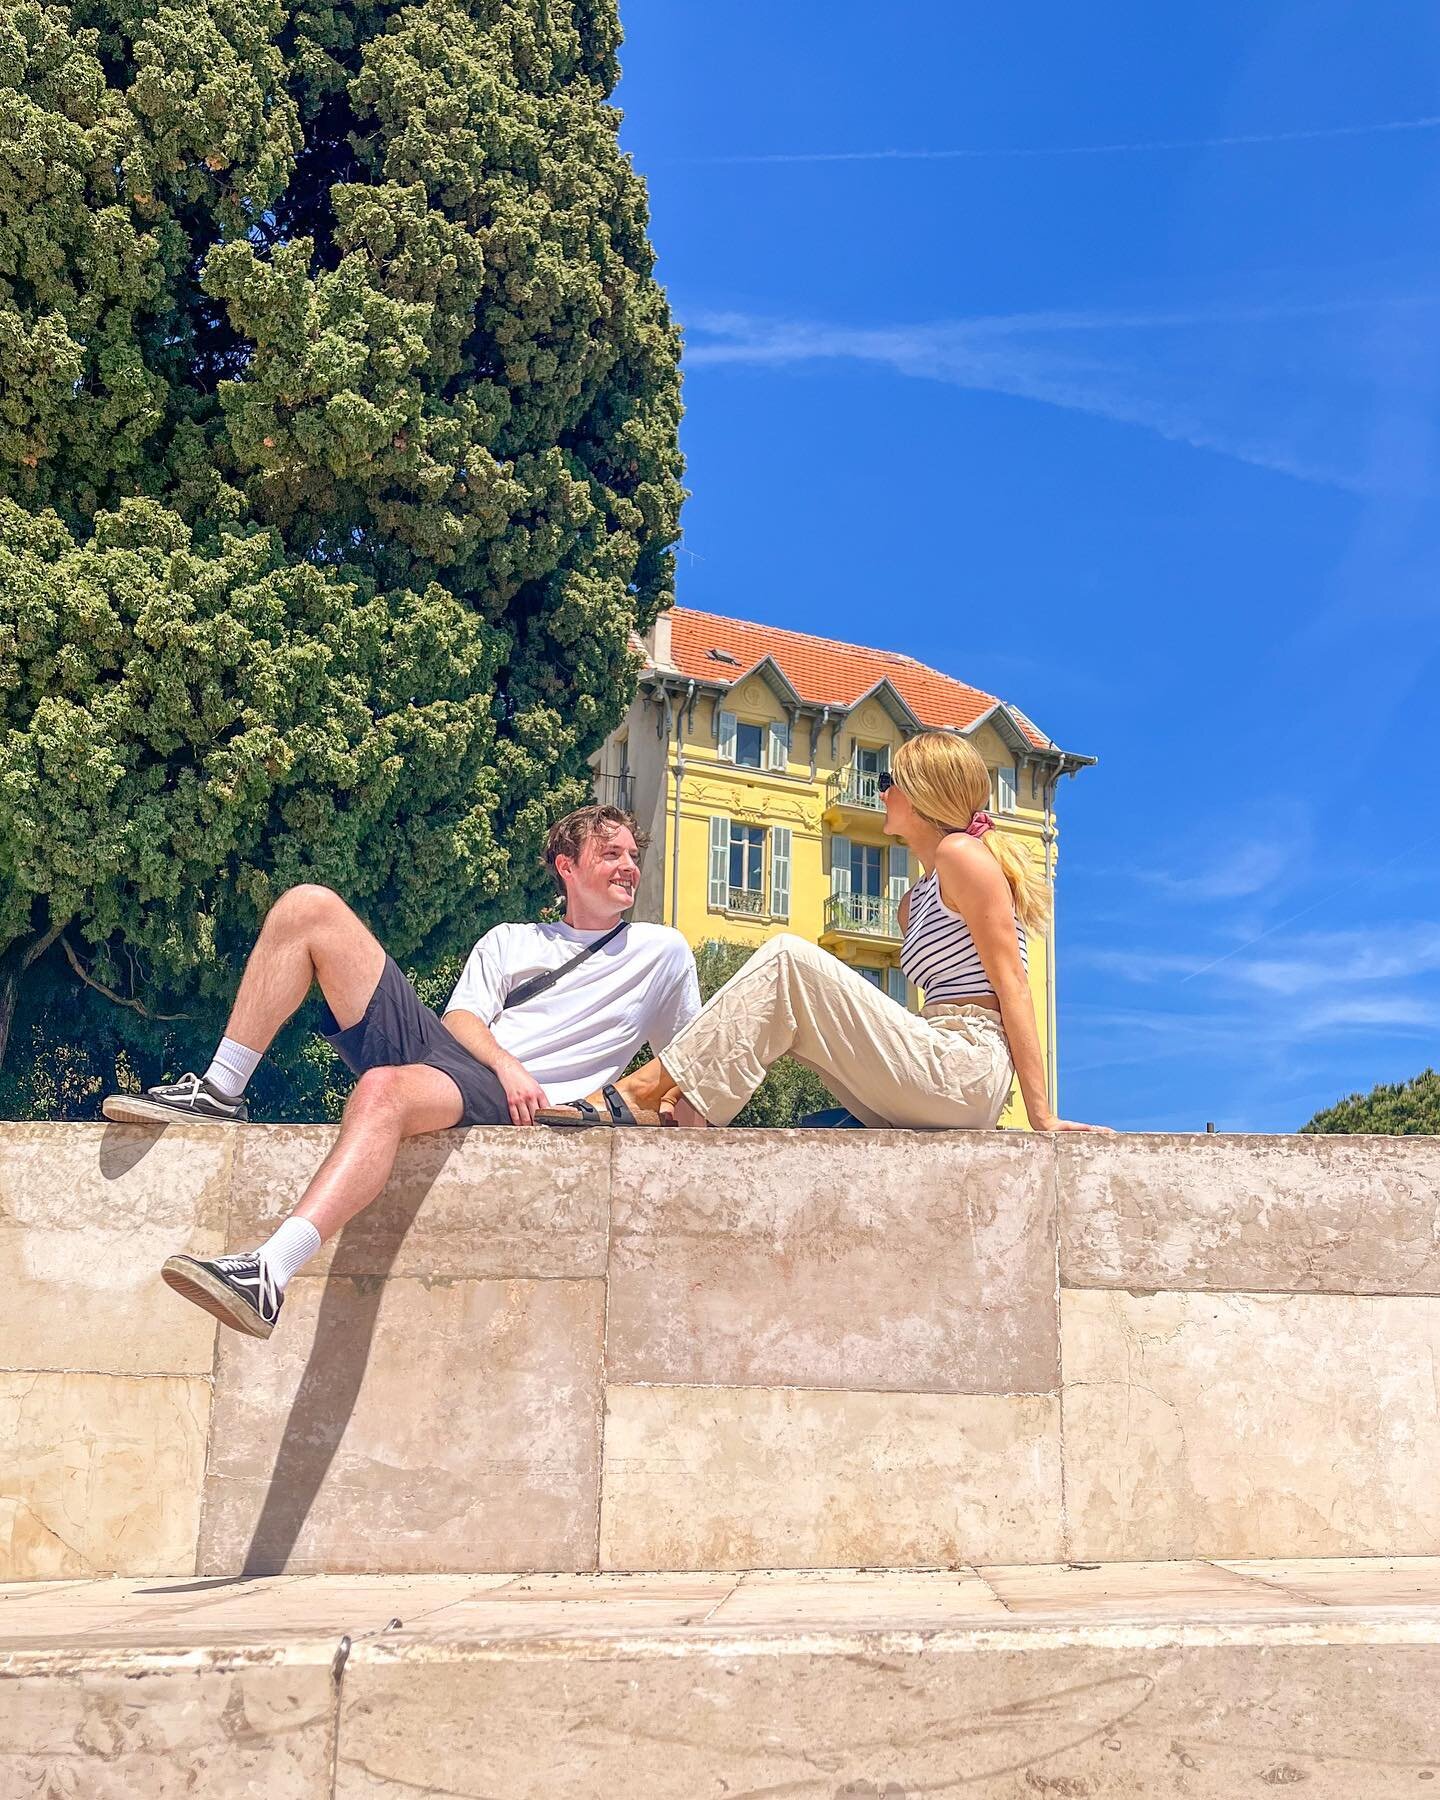 📍Nice, France 🇫🇷

Absolutely loving our time here in the beautiful Cote d&rsquo;Azur town of Nice. We are grateful to have partnered with @famoushostels and @villahostels to curate and experience an incredibly warm + sunny spring city break trip! 